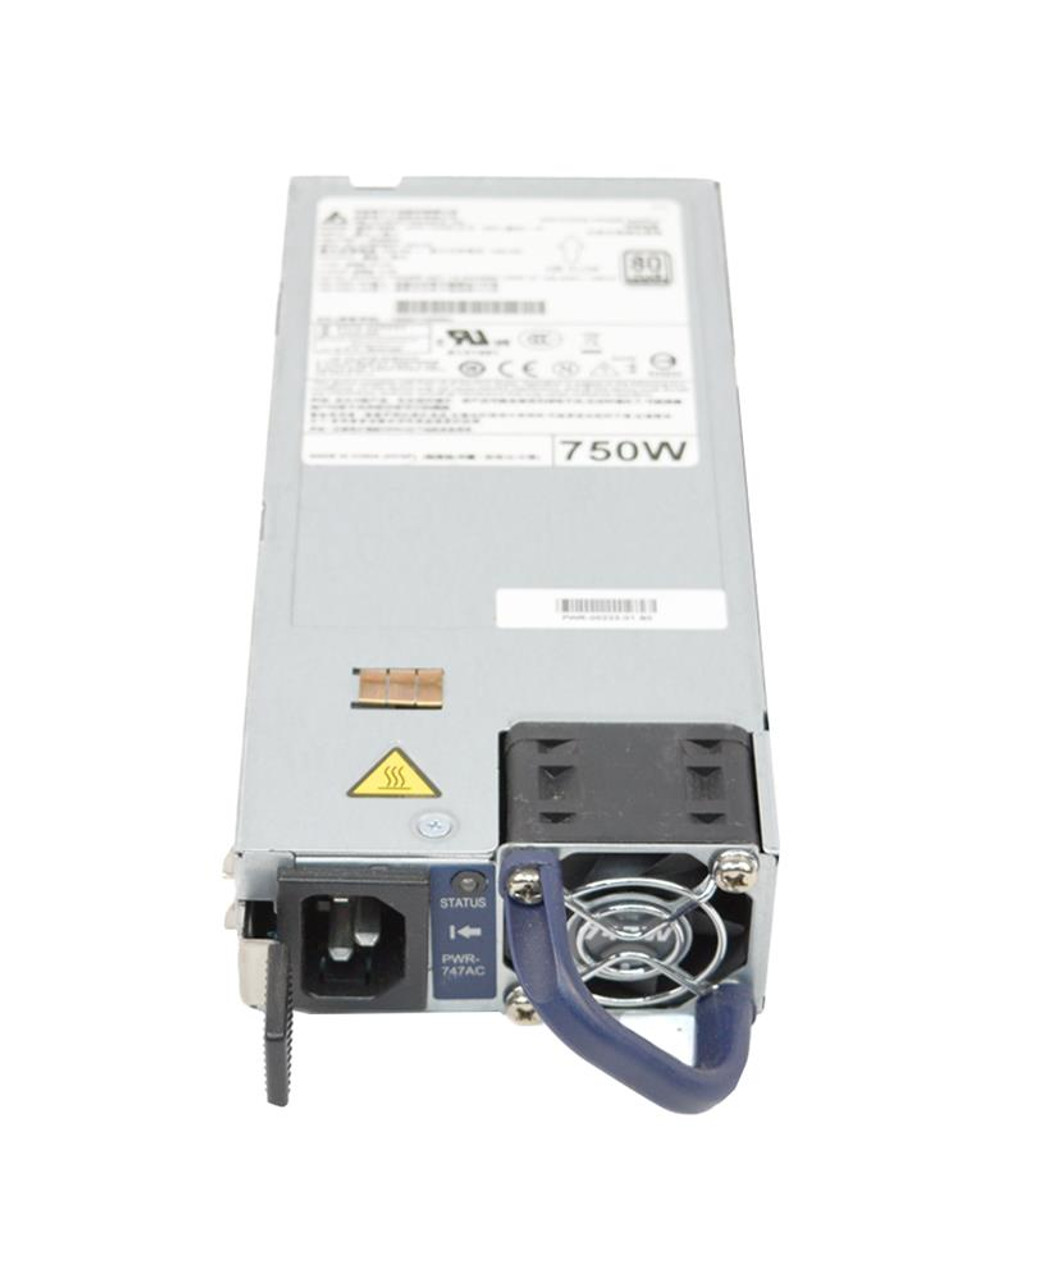 PWR-747AC-BLUE HP Arista 750-Watts AC power supply for Arista 7280R Switches (rear-to-front airflow)